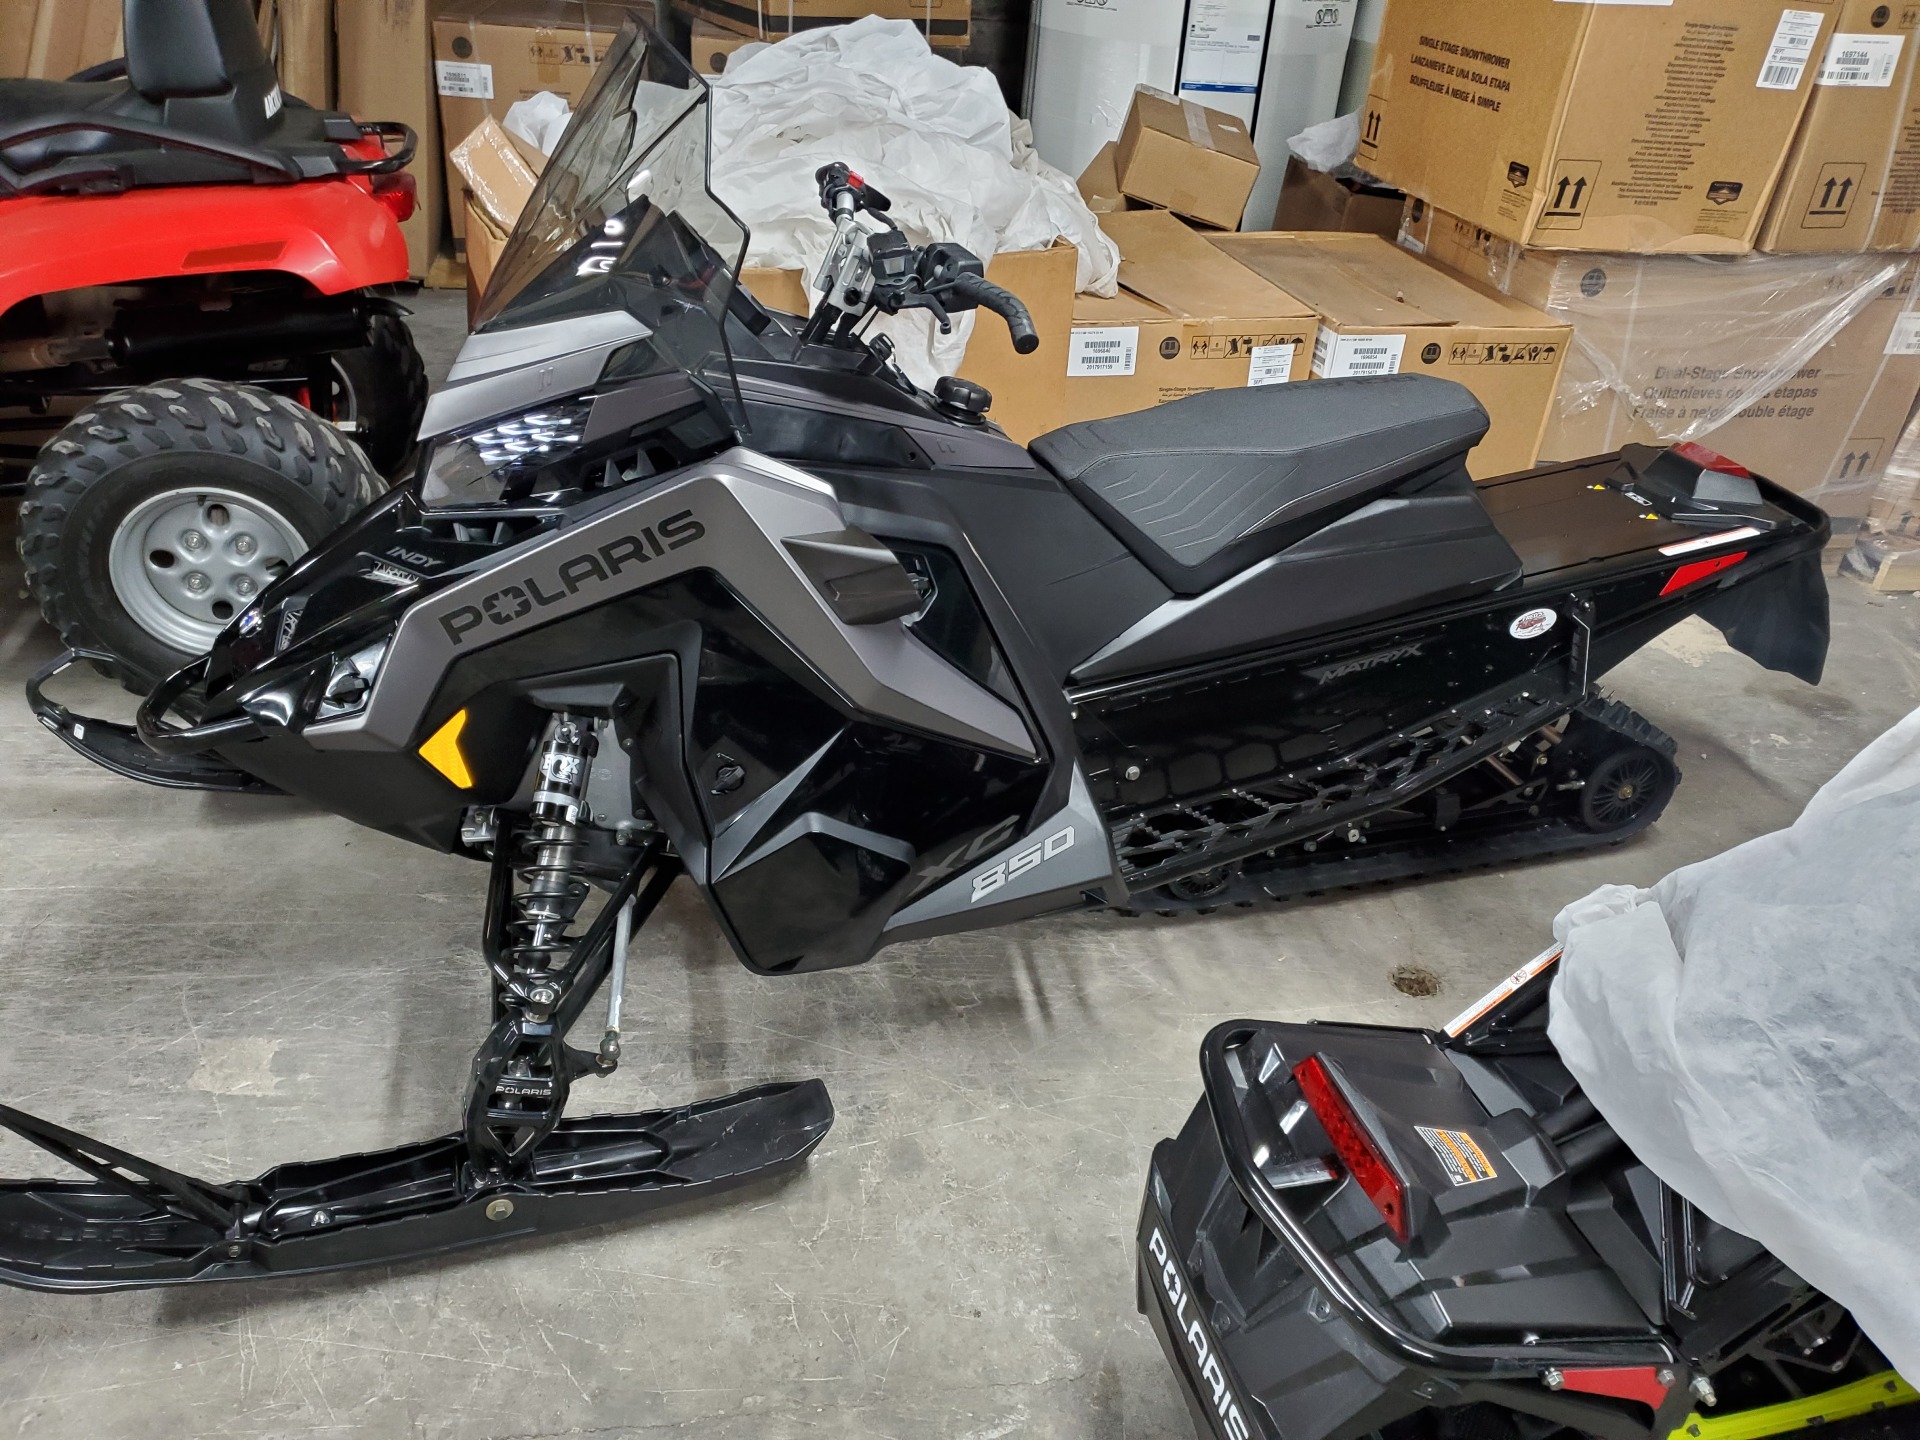 2022 Polaris 850 Indy XC 129 Factory Choice in Fond Du Lac, Wisconsin - Photo 8